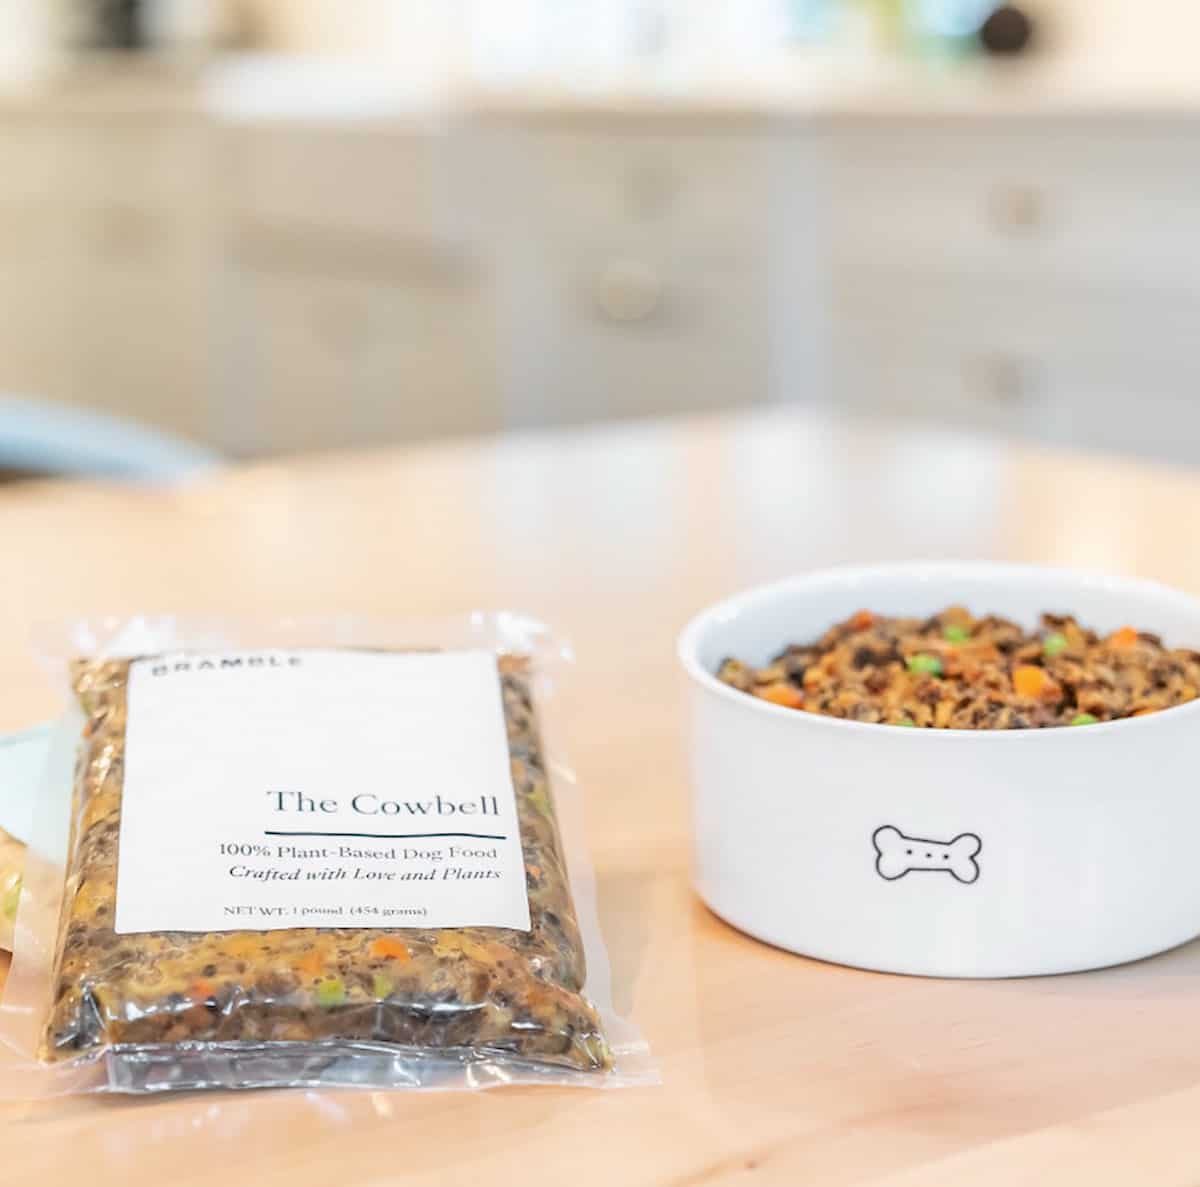 A bowl of vegan dog food next to a package of Bramble The Cowbell 100% Plant-Based Dog Food.